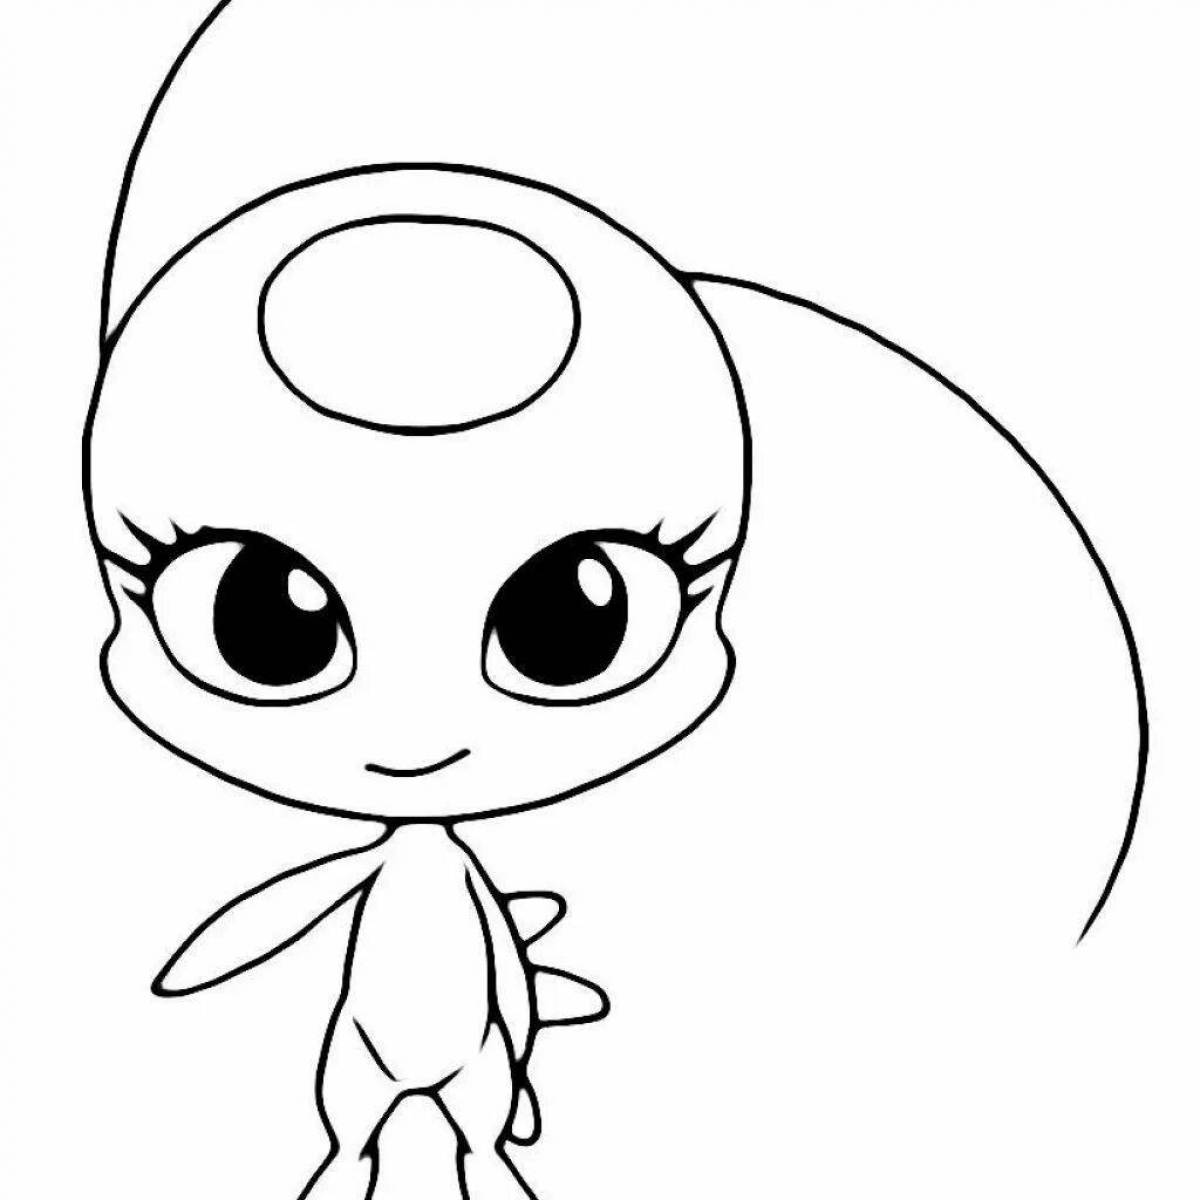 Coloring page miraculous lady bug lol